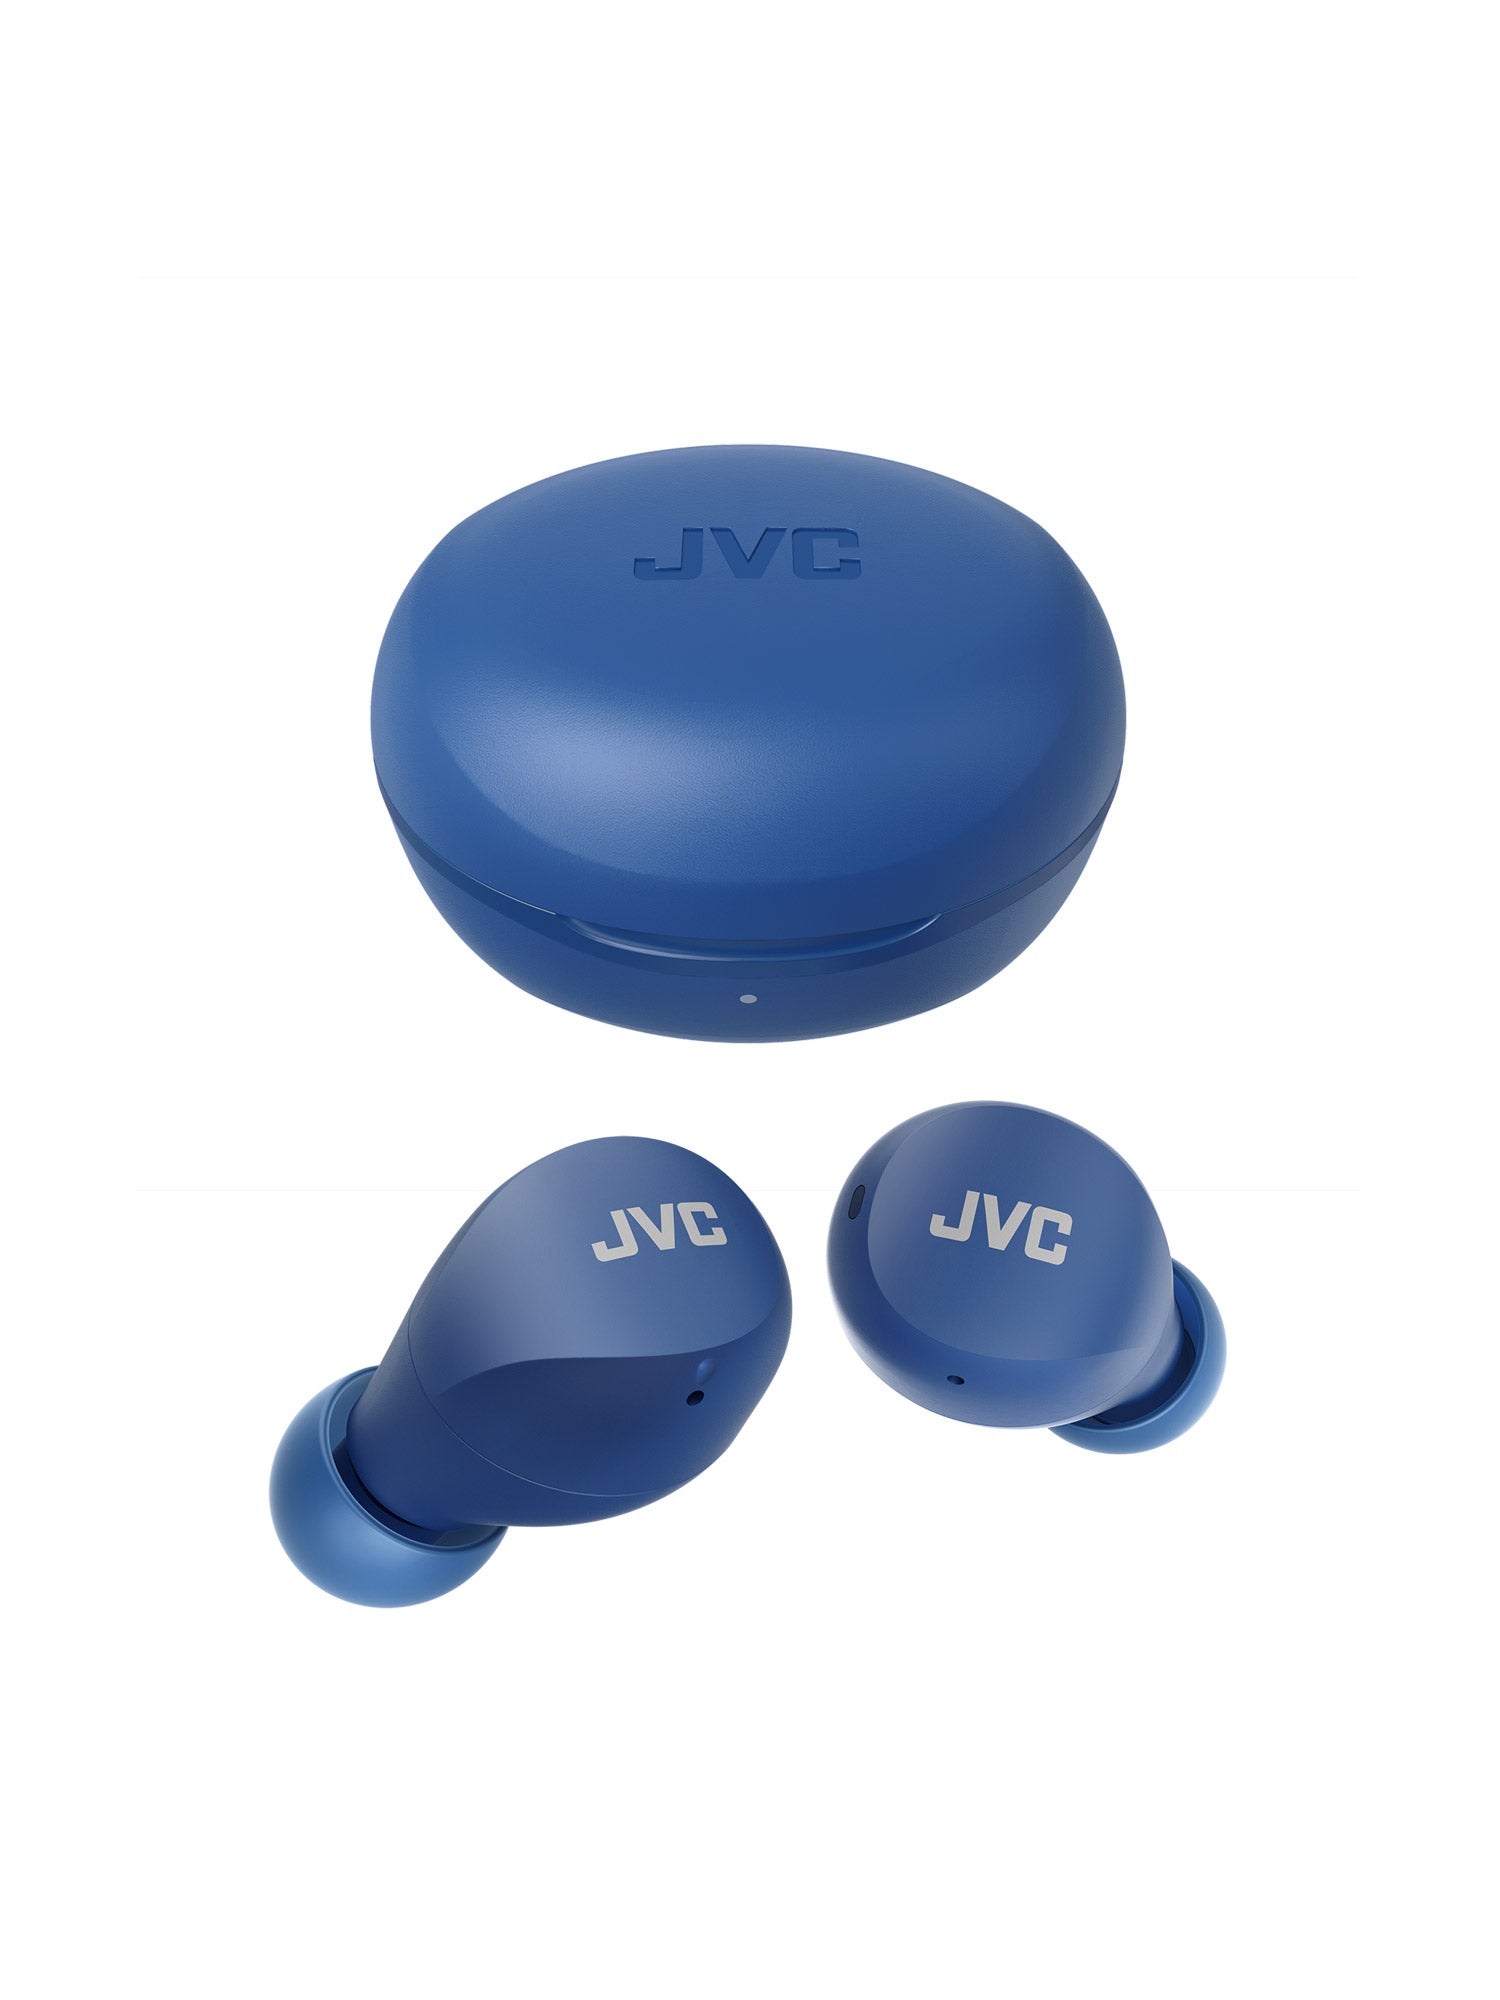 HA-A6T-A in Blue Gumy mini wireless earbuds &amp; charger by JVC